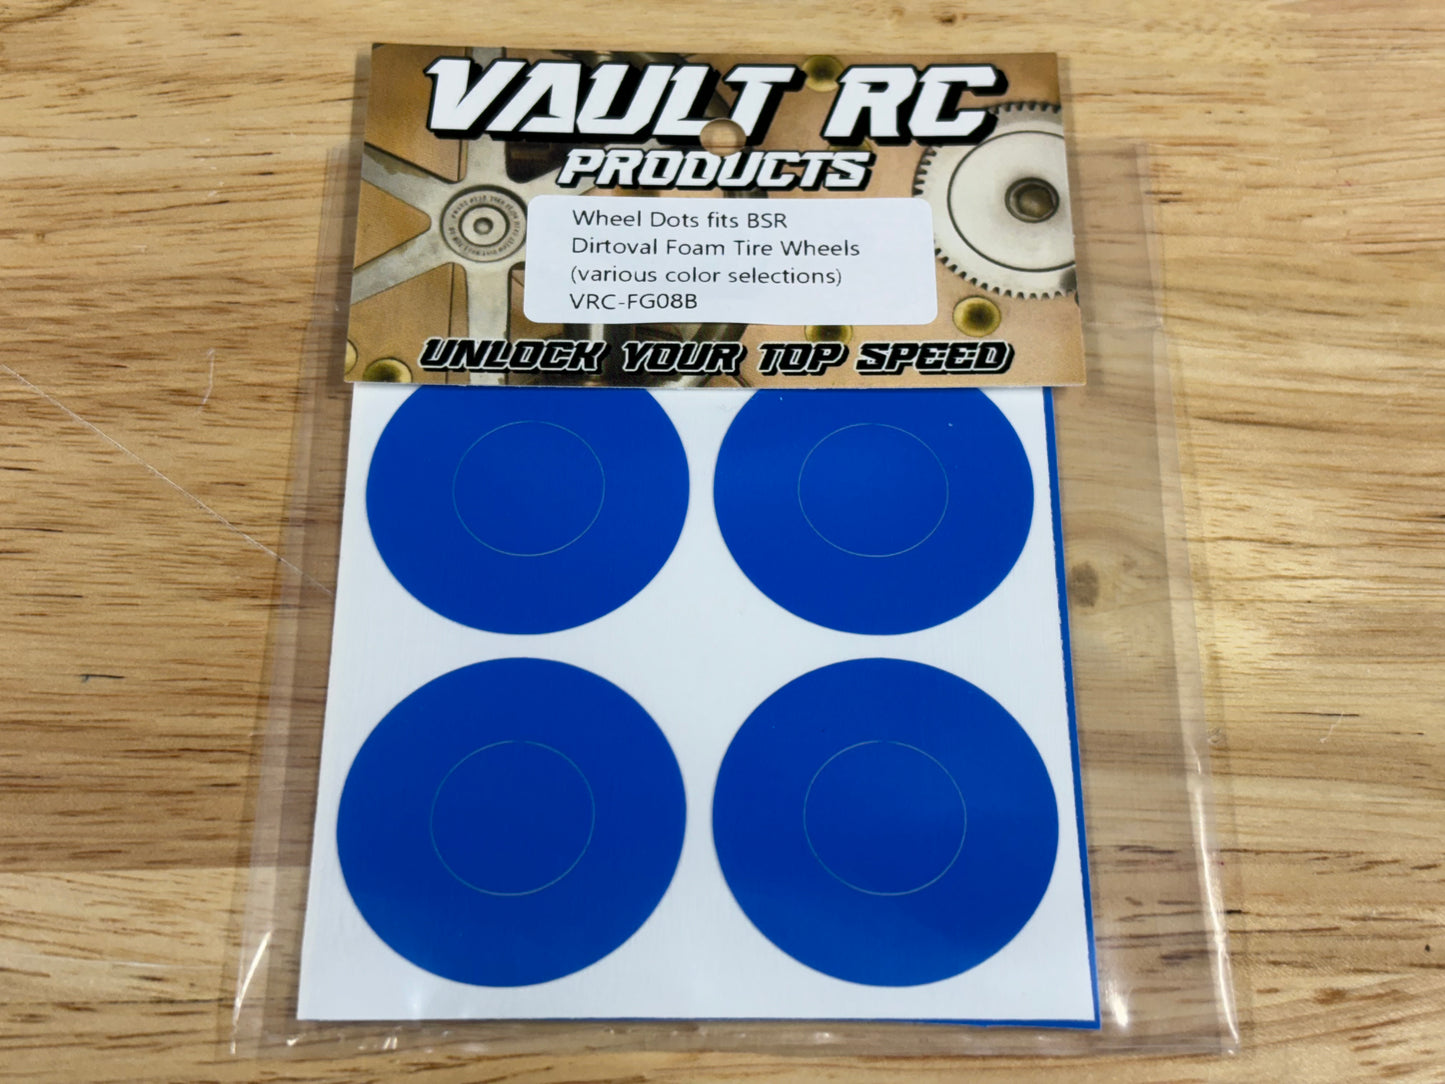 Wheel Dots fits BSR Dirtoval Foam Tire Wheels, various color selections